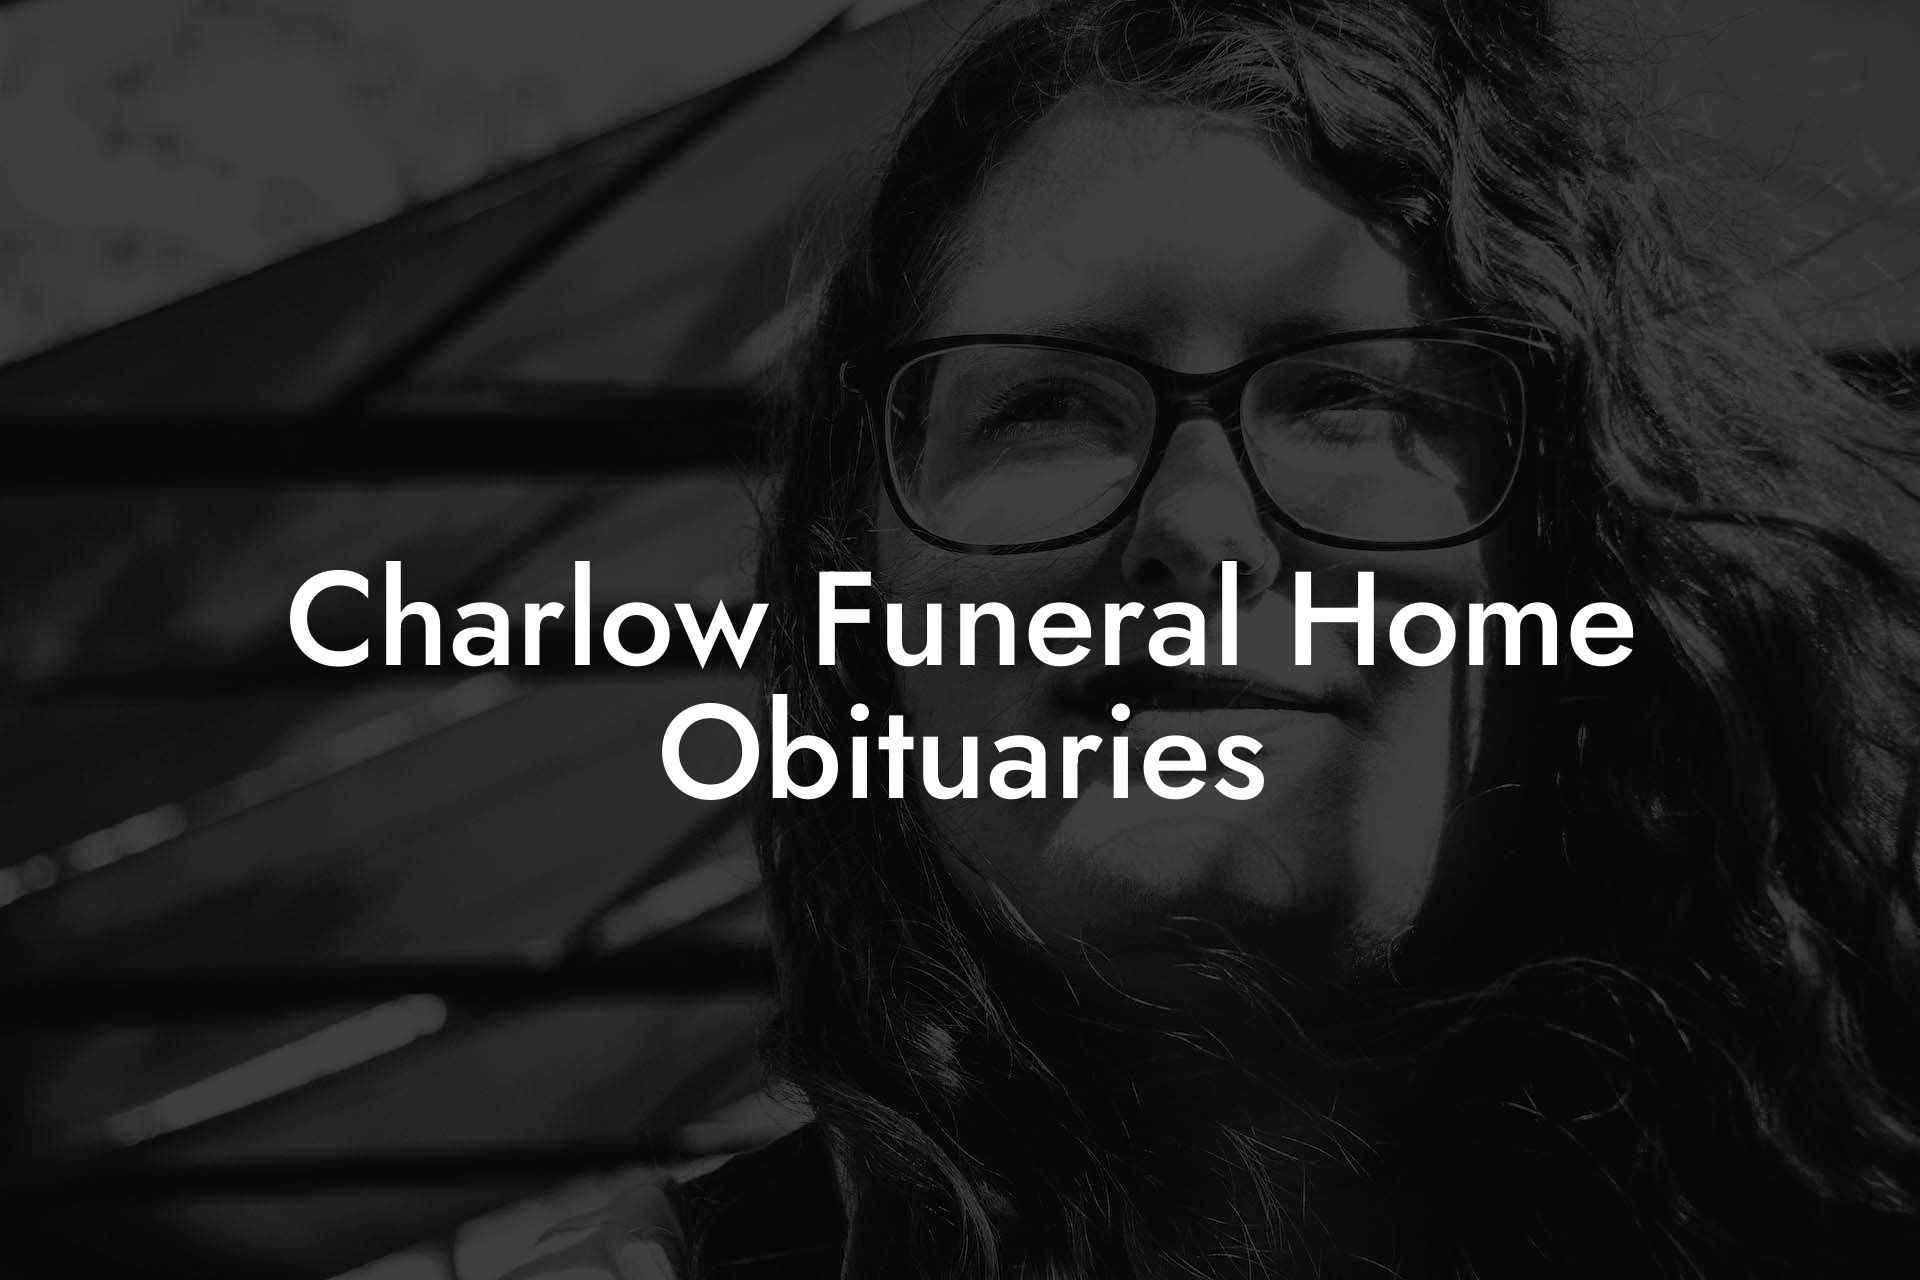 Charlow Funeral Home Obituaries